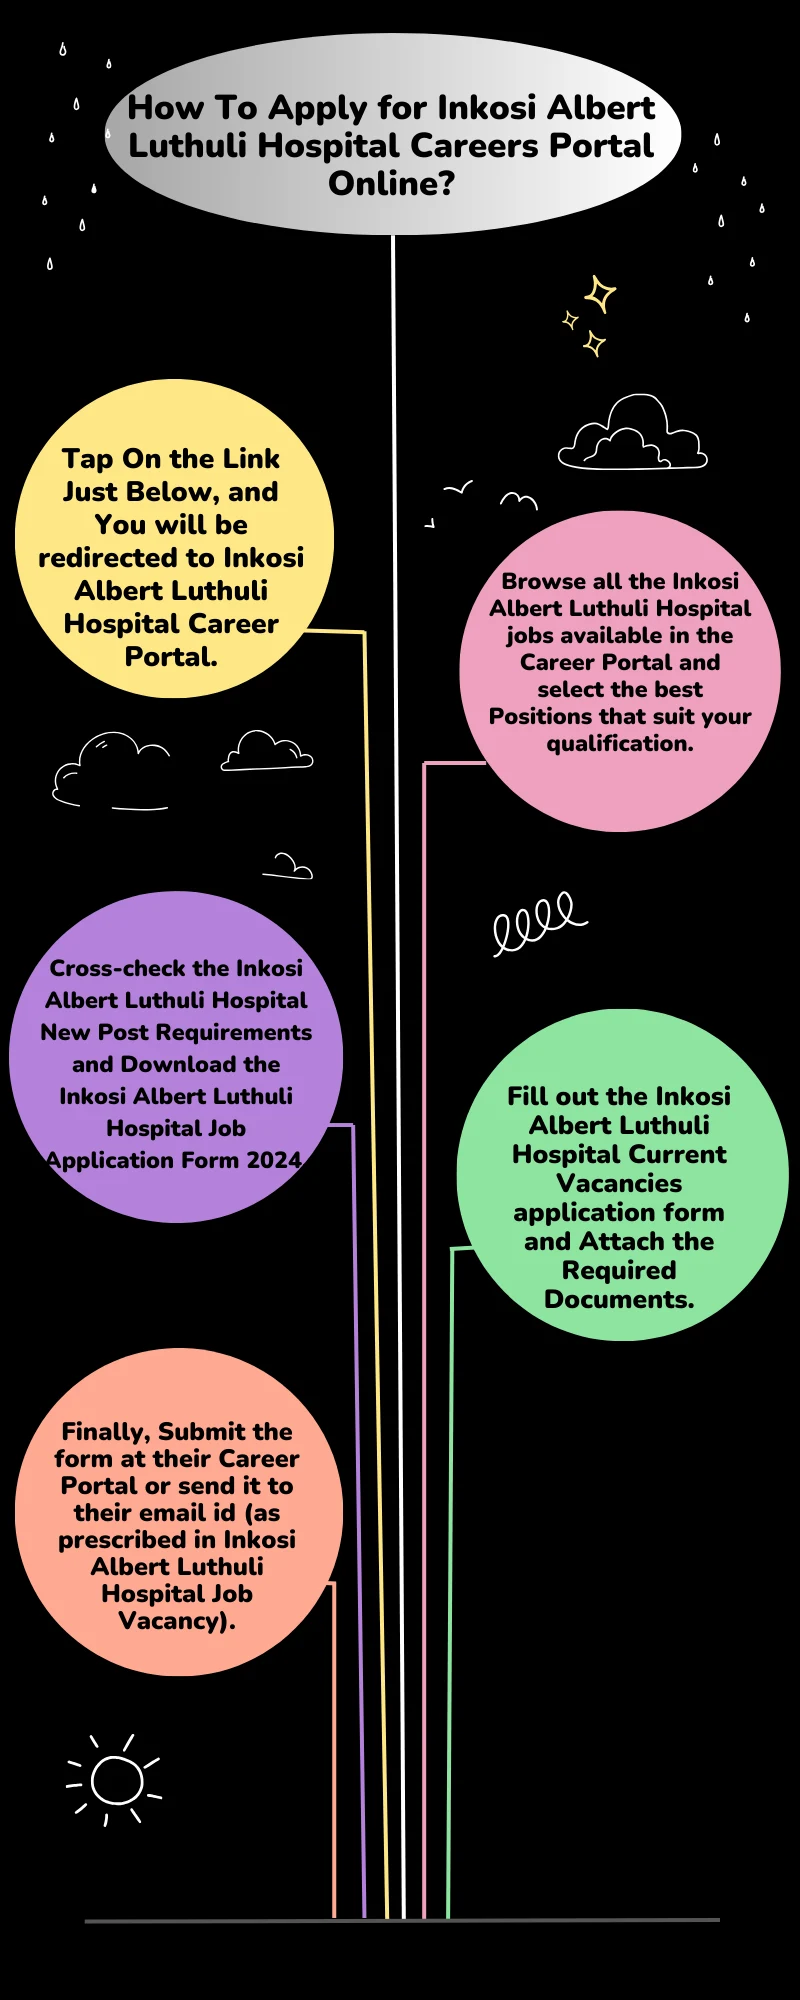 How To Apply for Inkosi Albert Luthuli Hospital Careers Portal Online?